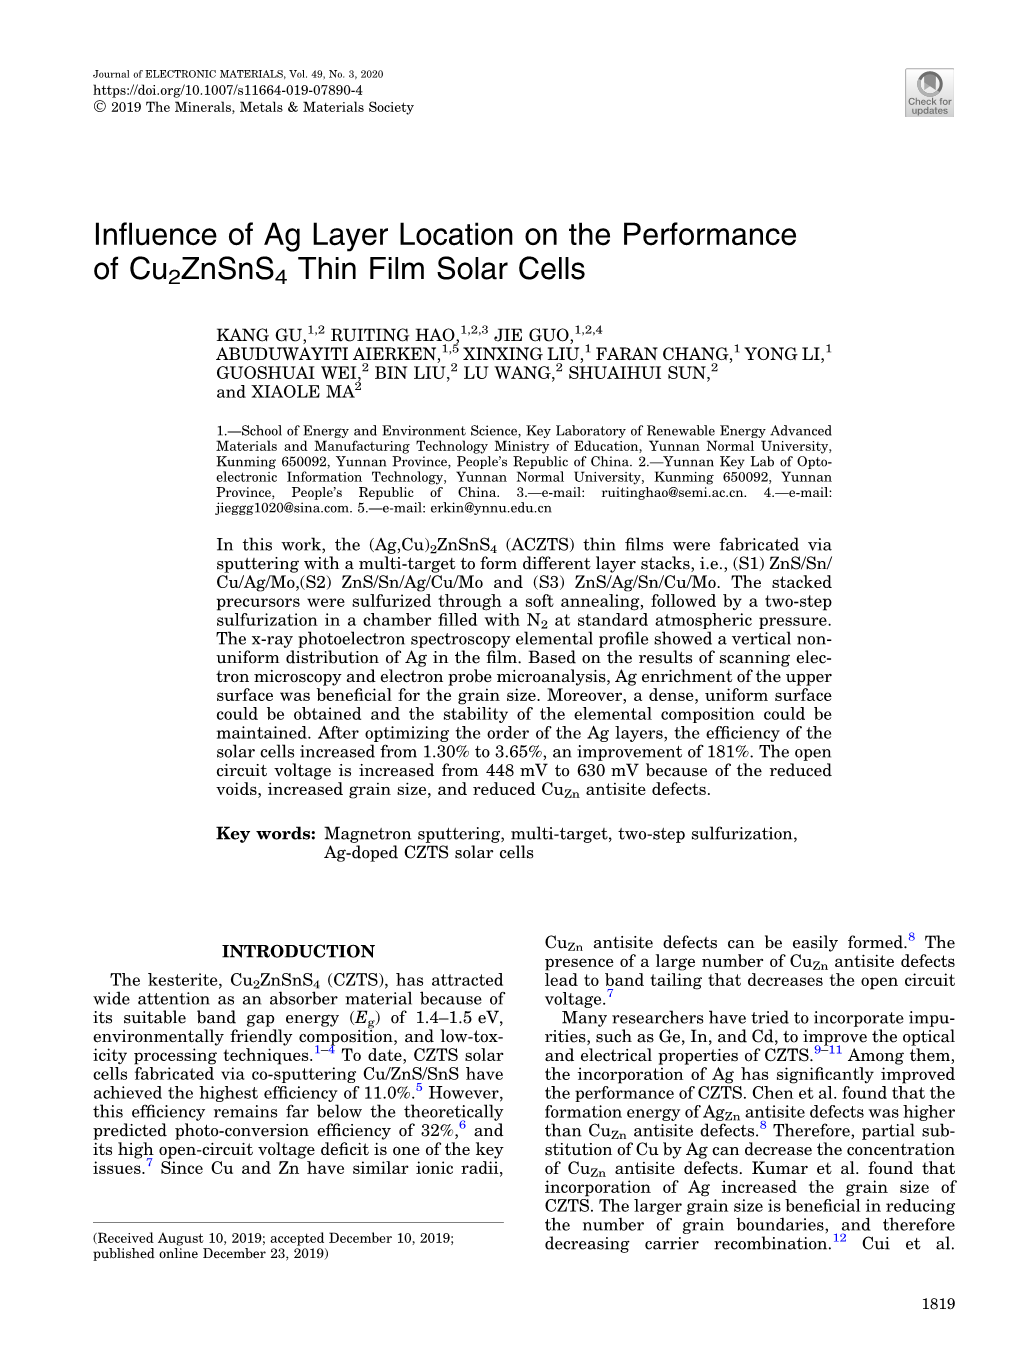 Influence of Ag Layer Location on the Performance of Cu 2 Znsns 4 Thin